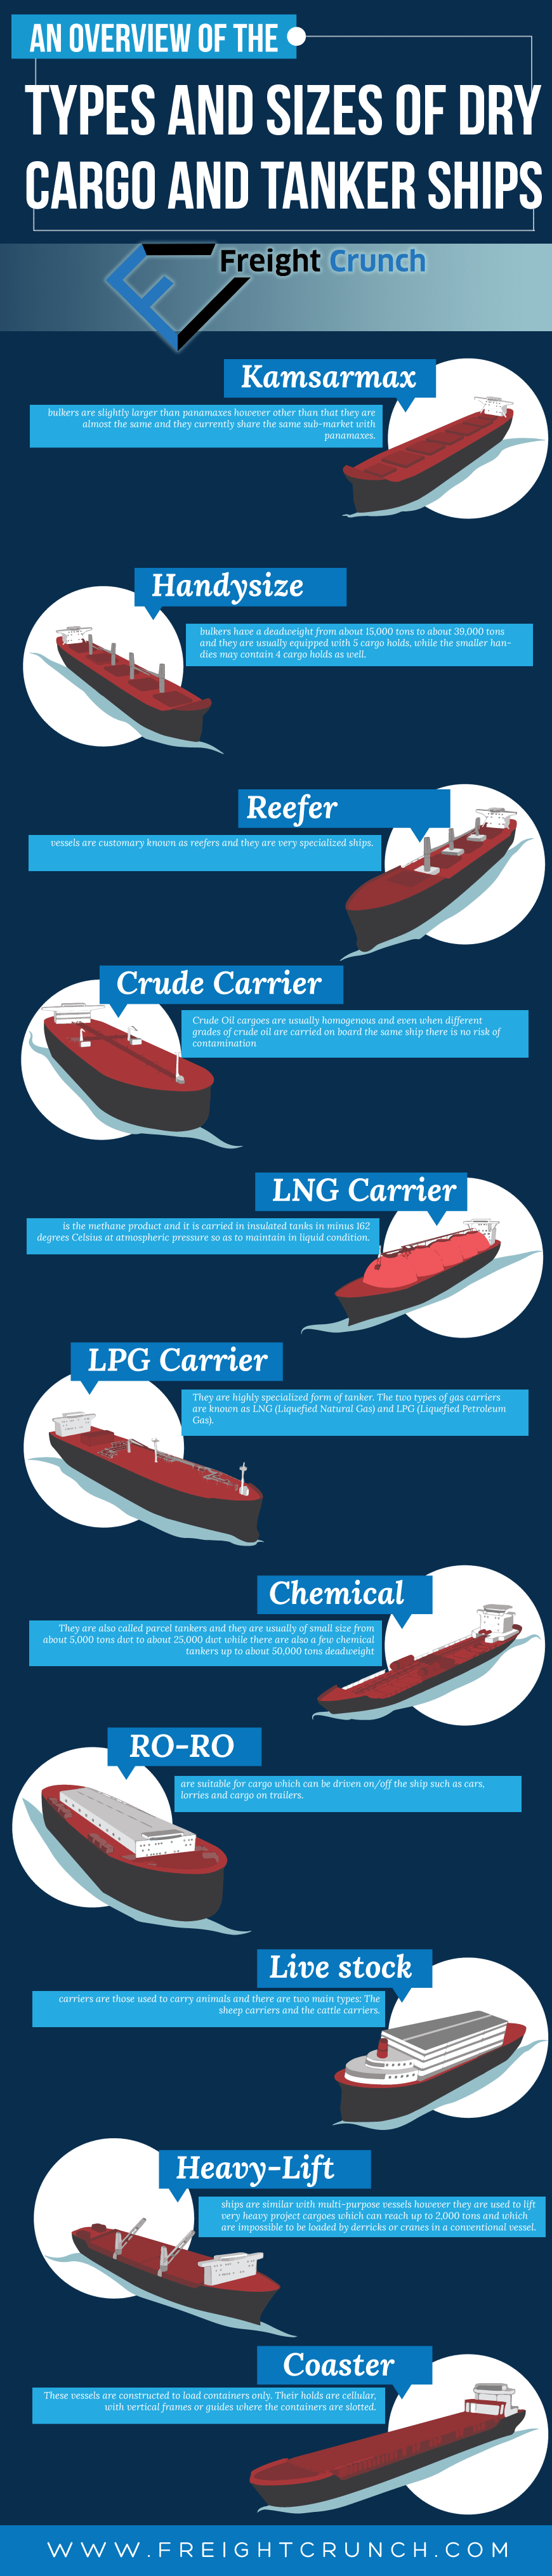 An Overview of the Types and Sizes of Dry Cargo and Tanker Ships